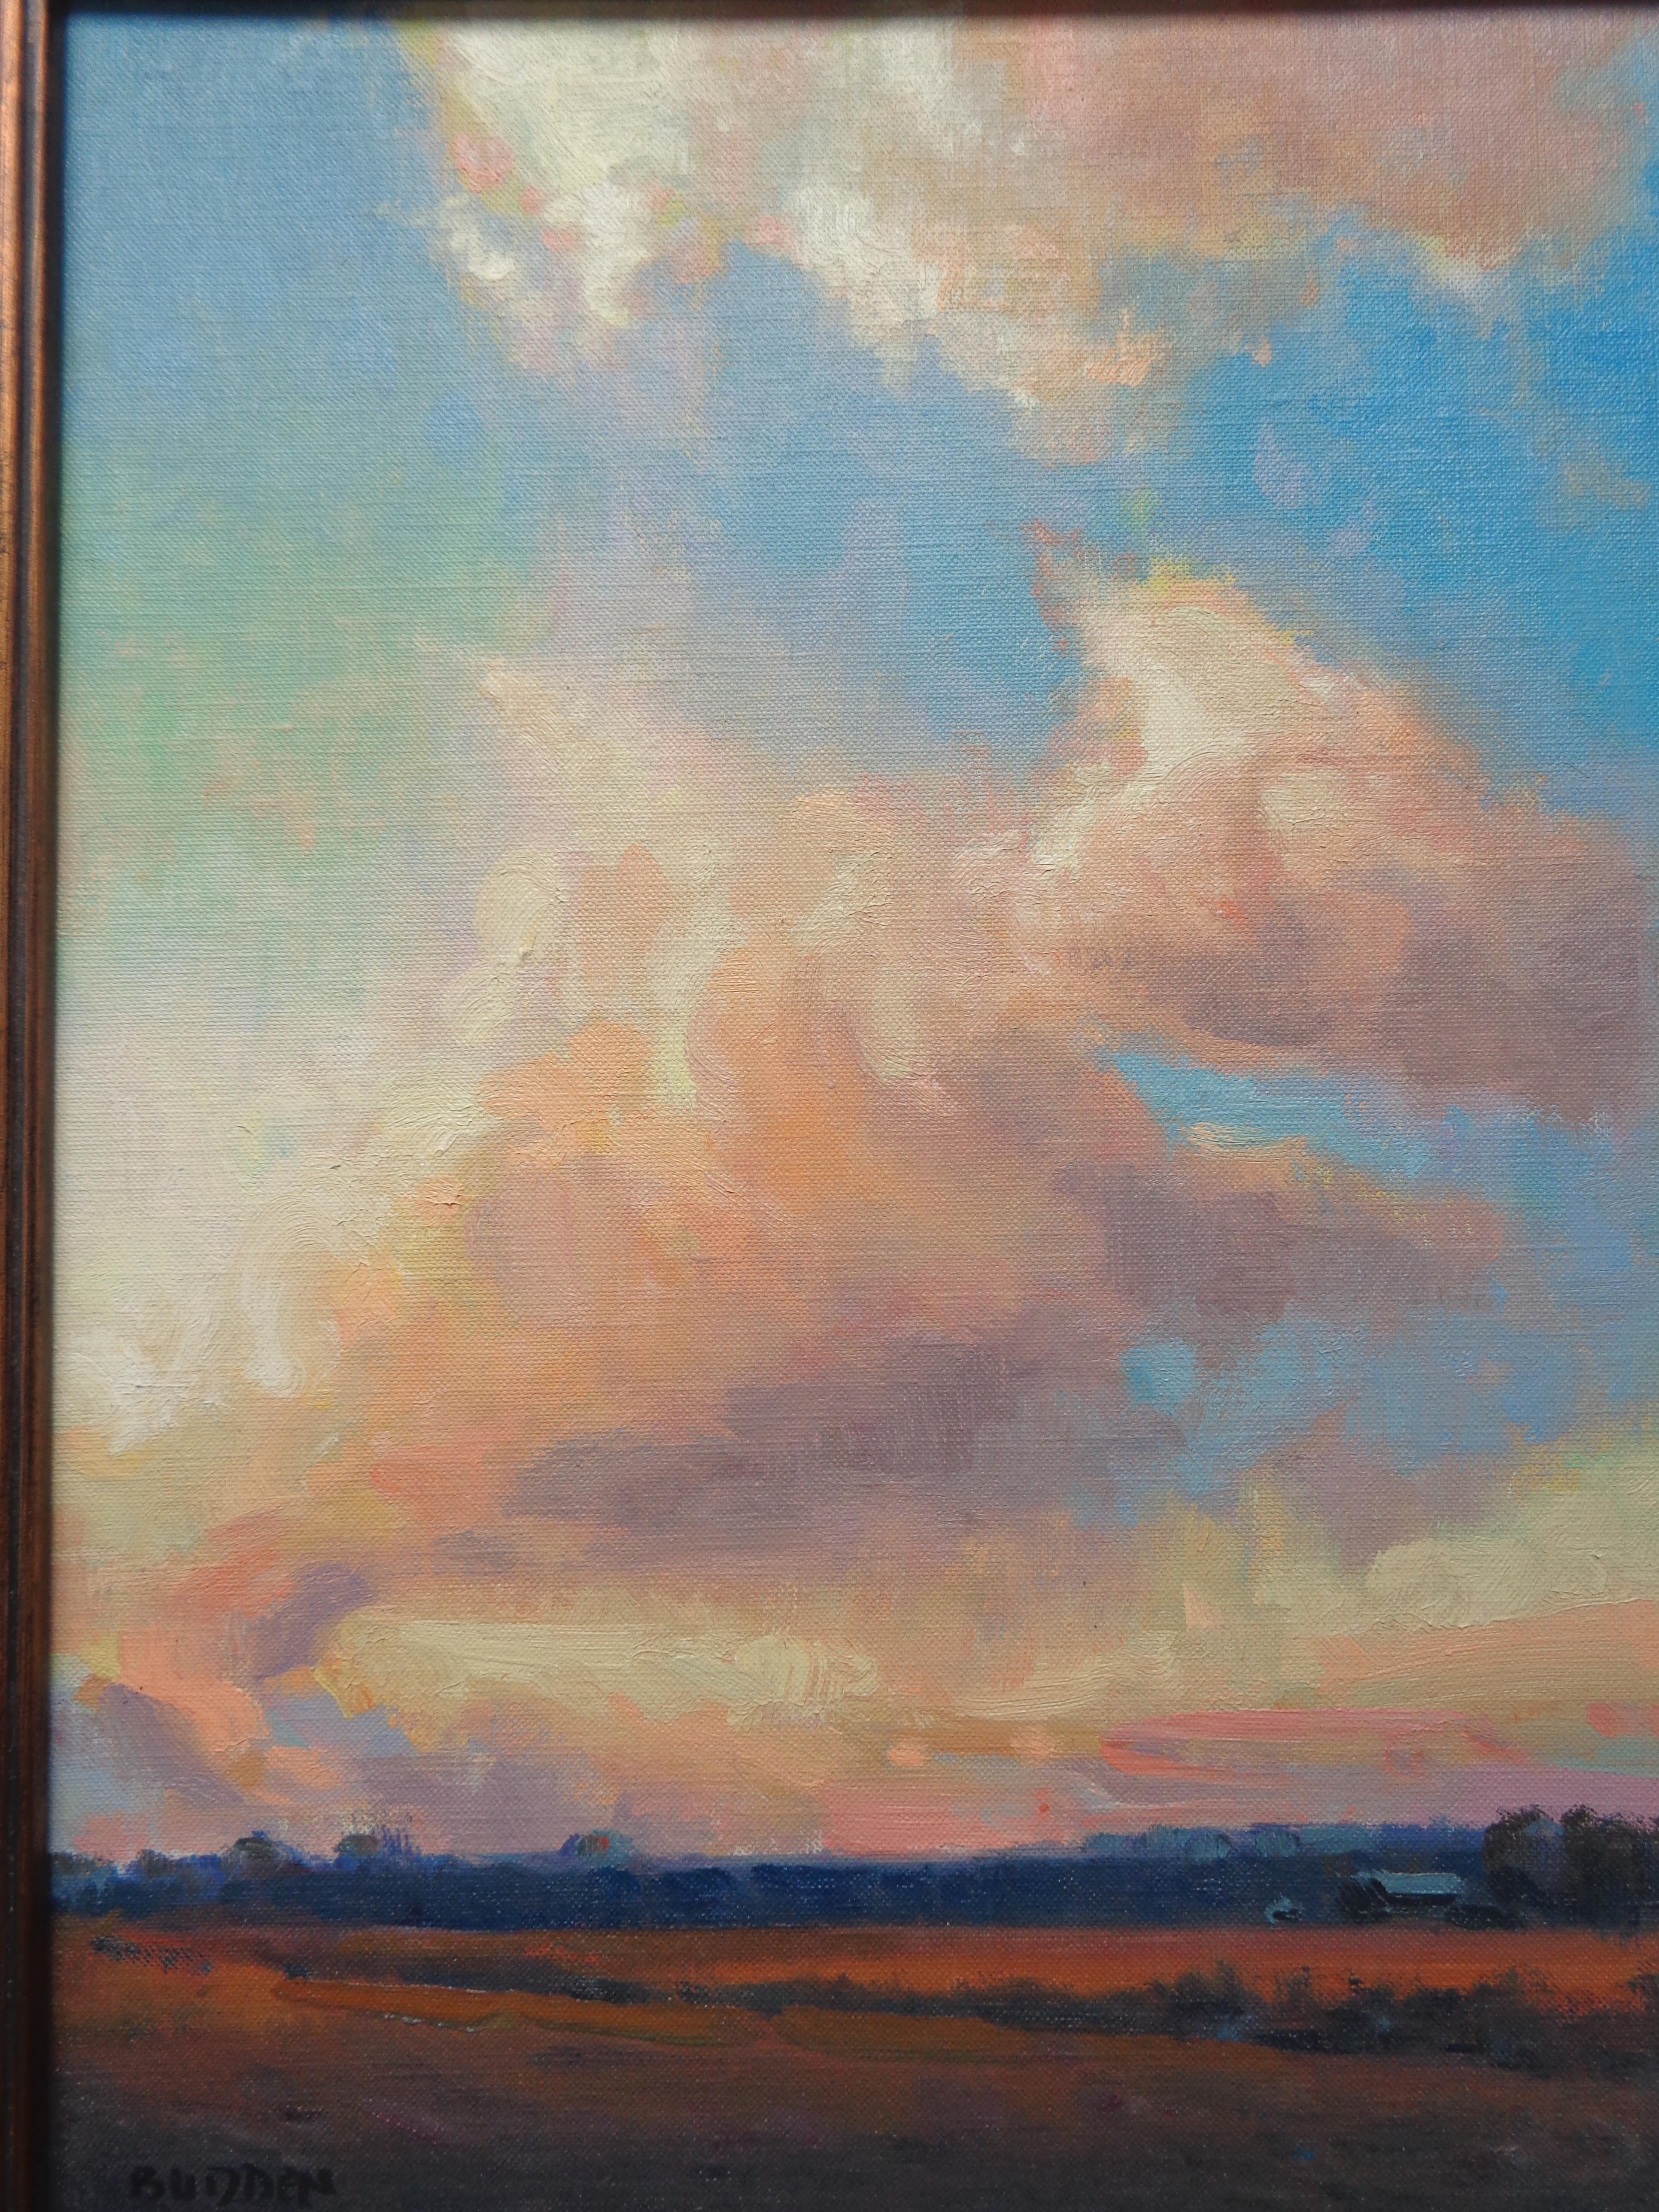  Dramatic Sunset Landscape & Clouds Impressionistic Oil Painting Michael Budden  For Sale 2